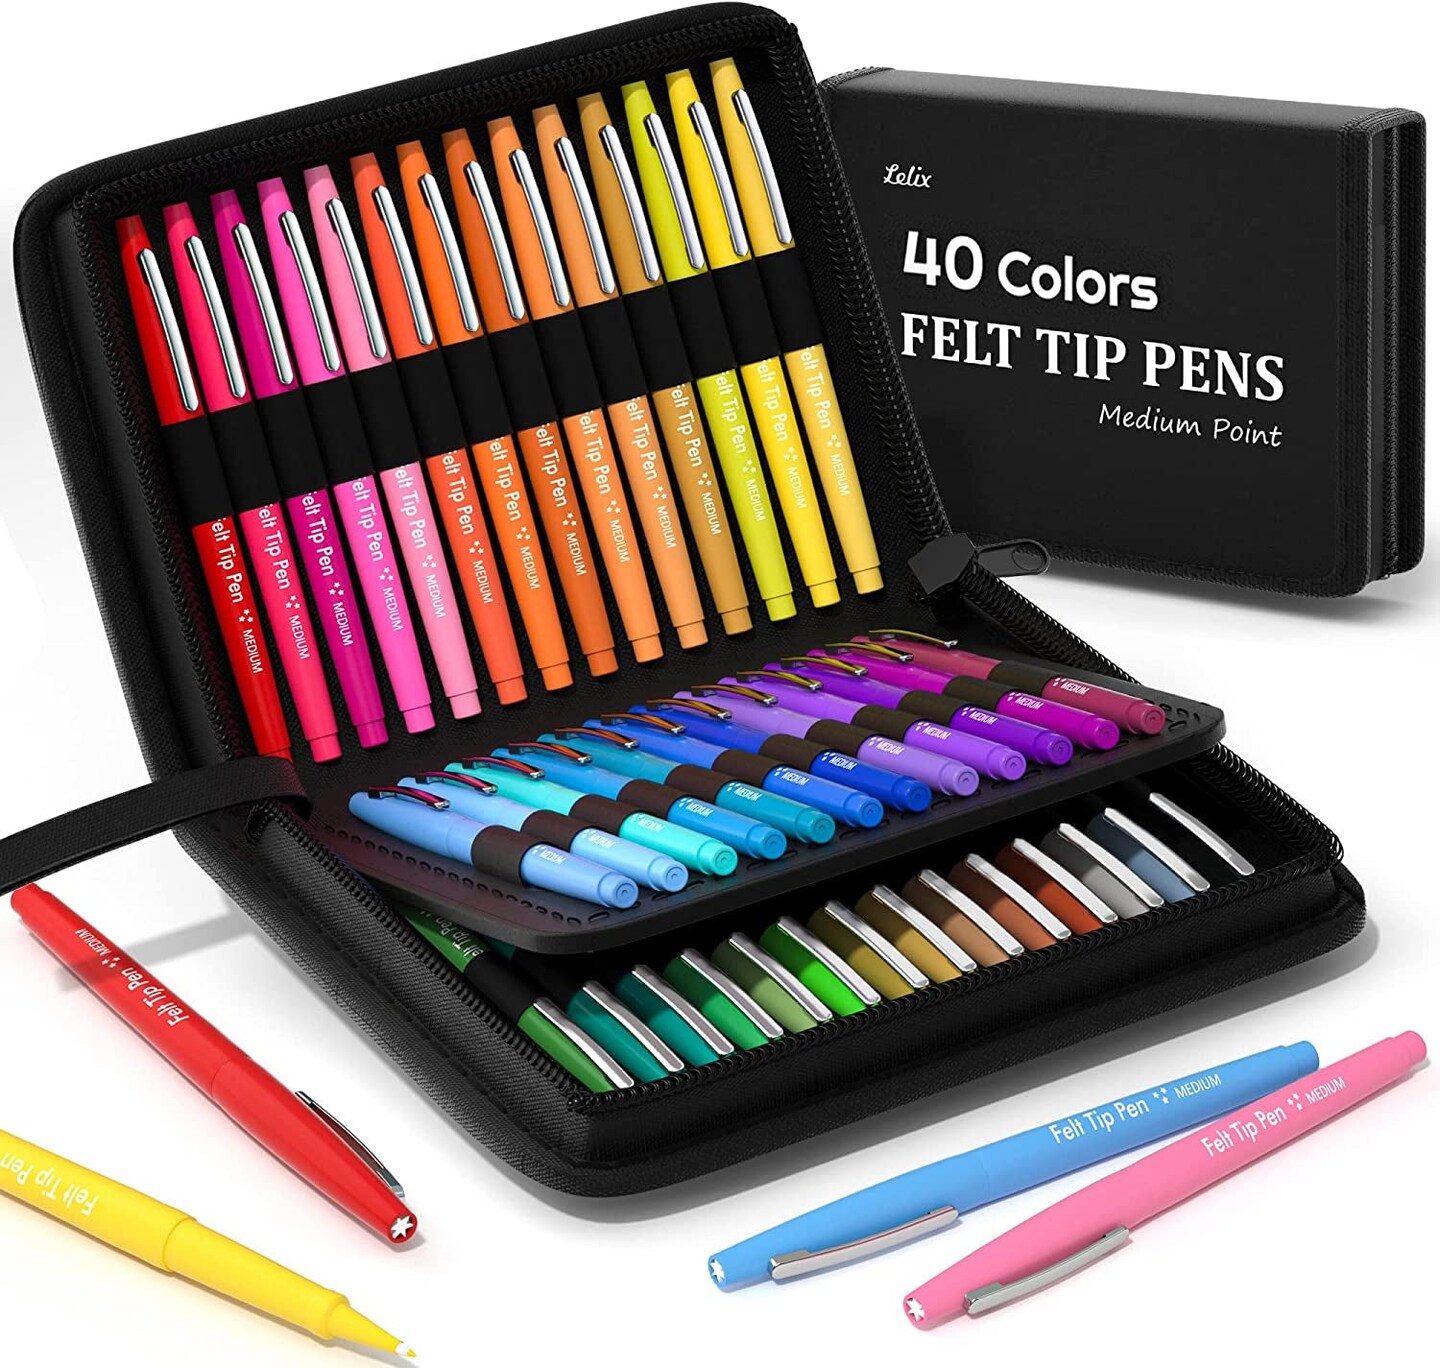  Lelix 30 Colors Felt Tip Pens, Medium Point Assorted Markers  Pens For Journaling, Writing, Note Taking, Planner Coloring, Perfect for  Art Office and School Supplies : Office Products